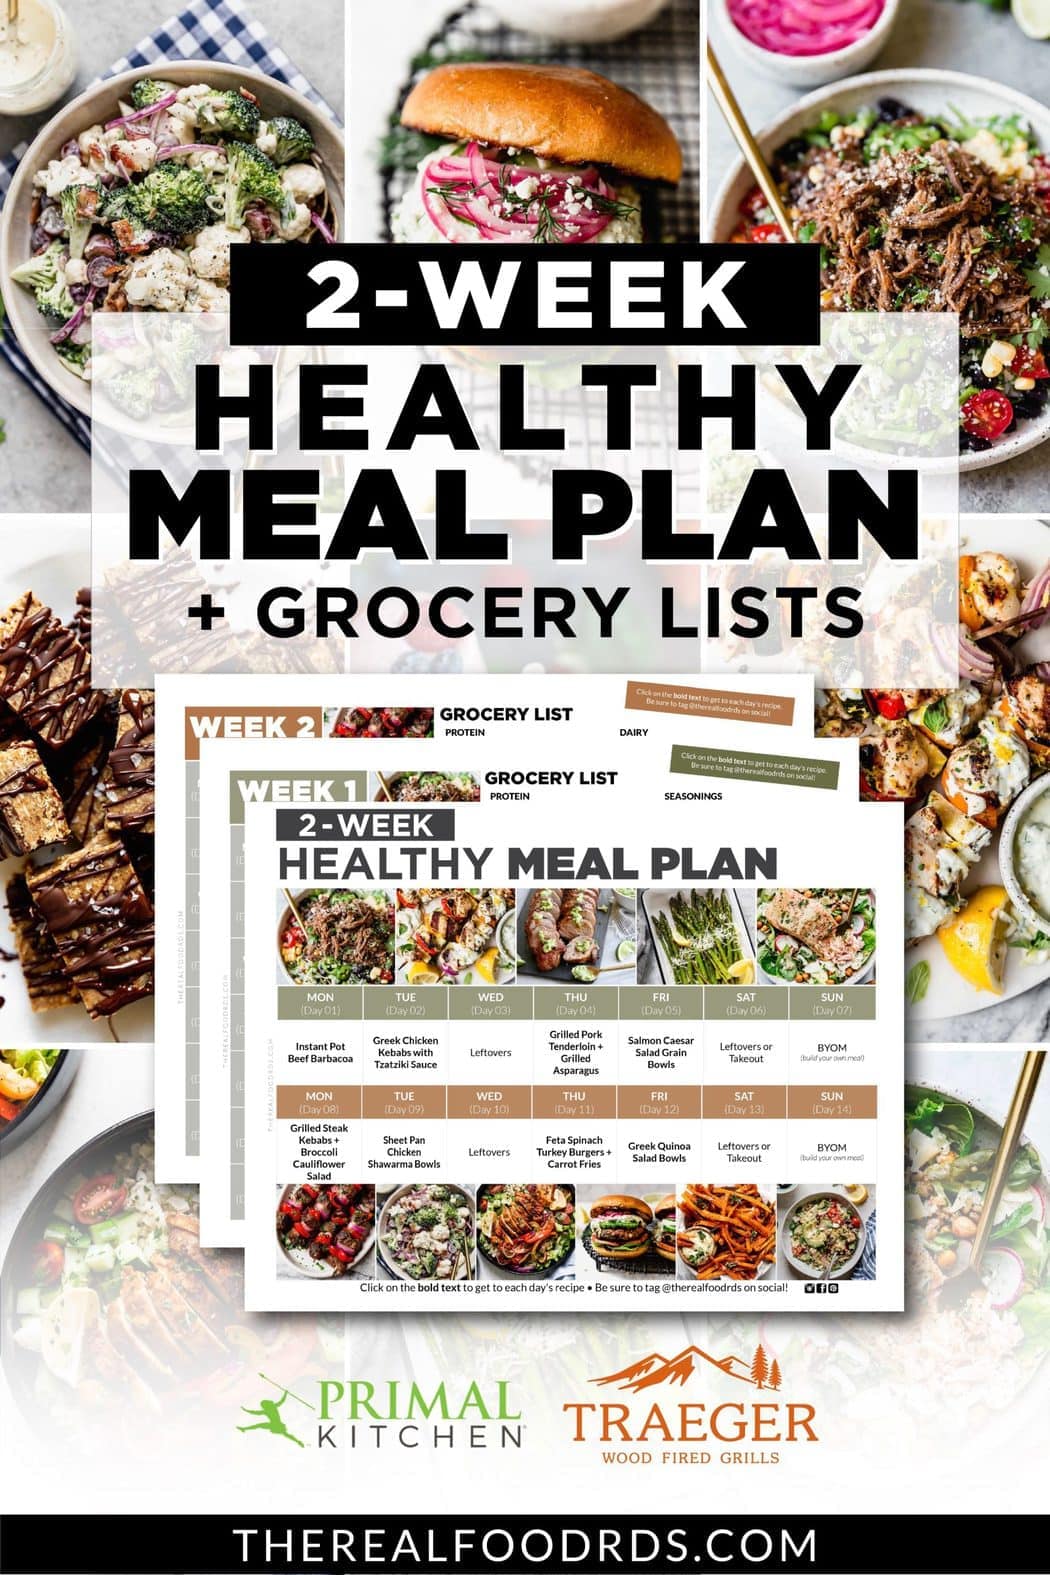 2-week-healthy-meal-plan-with-grocery-list-the-real-food-dietitians